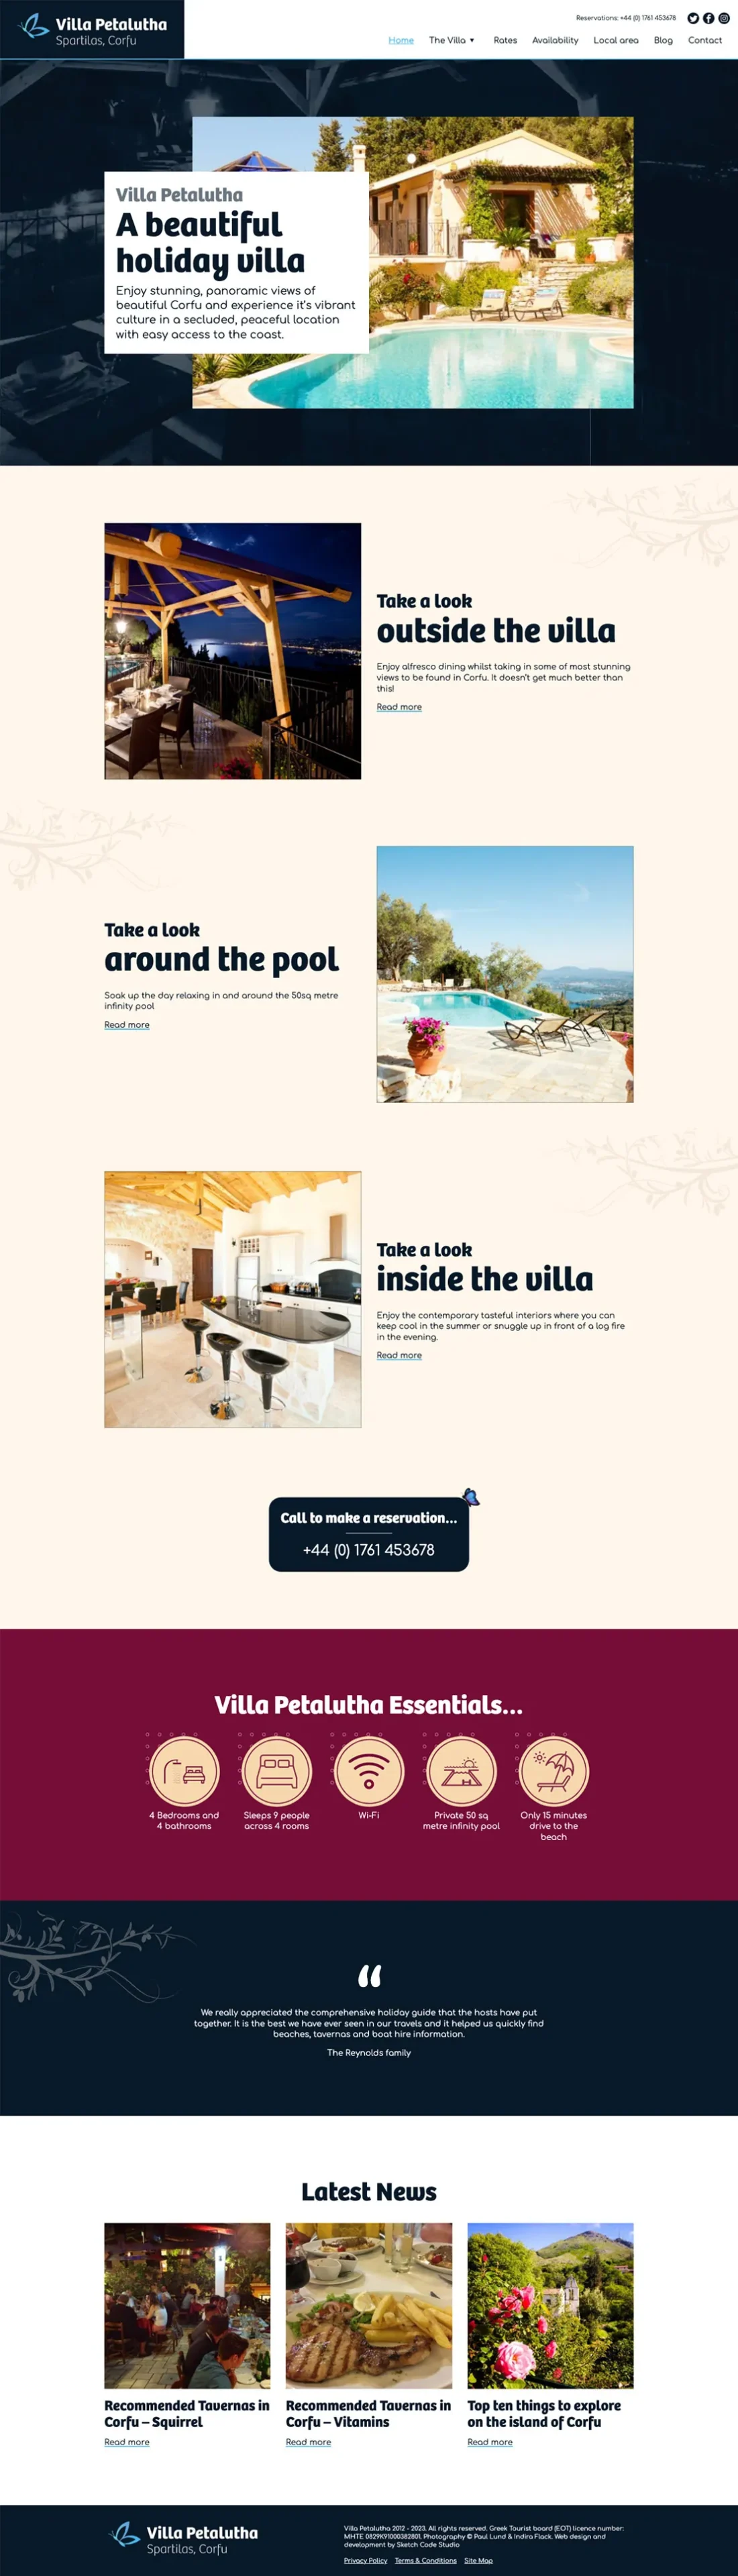 The design for the Villa Petalutha website home page